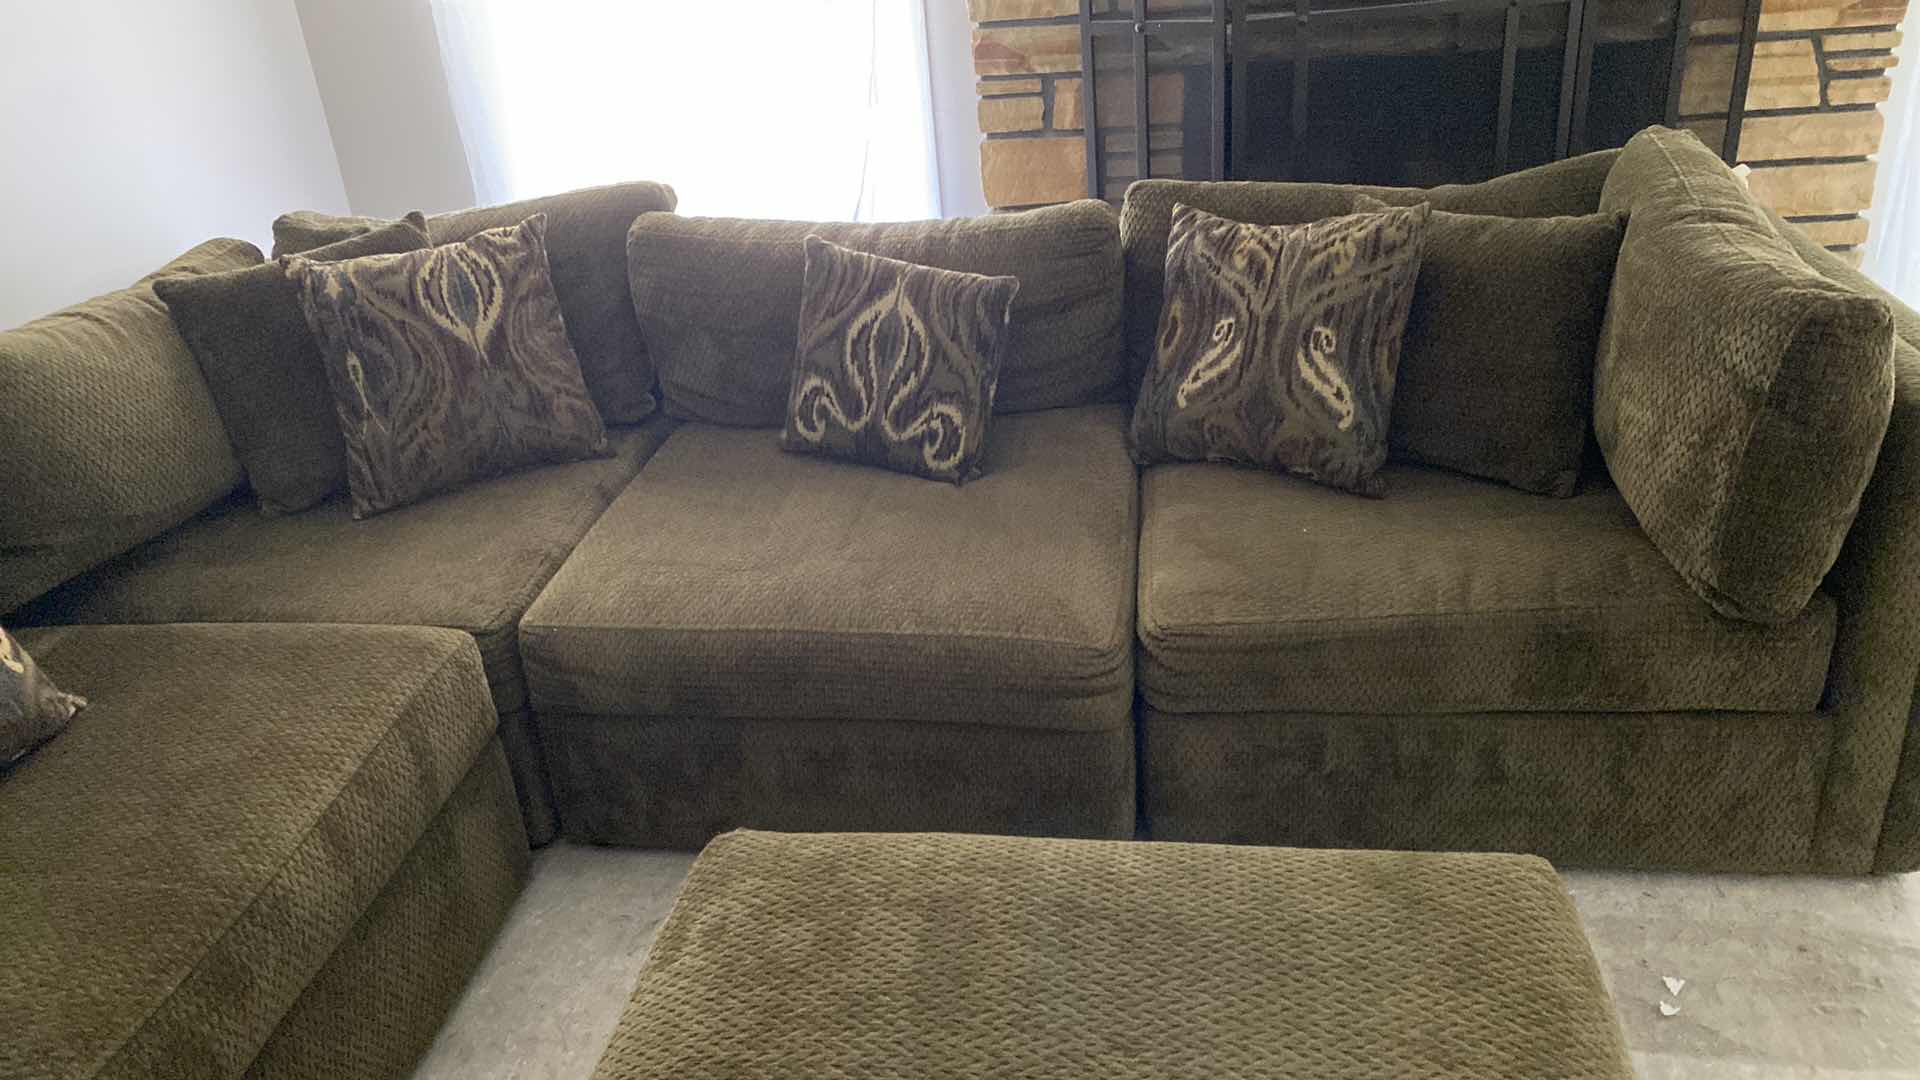 Photo 4 of 10‘ x 10‘ SECTIONAL OLIVE GREEN FABRIC SOFA AND OTTOMAN 3‘ x 3‘